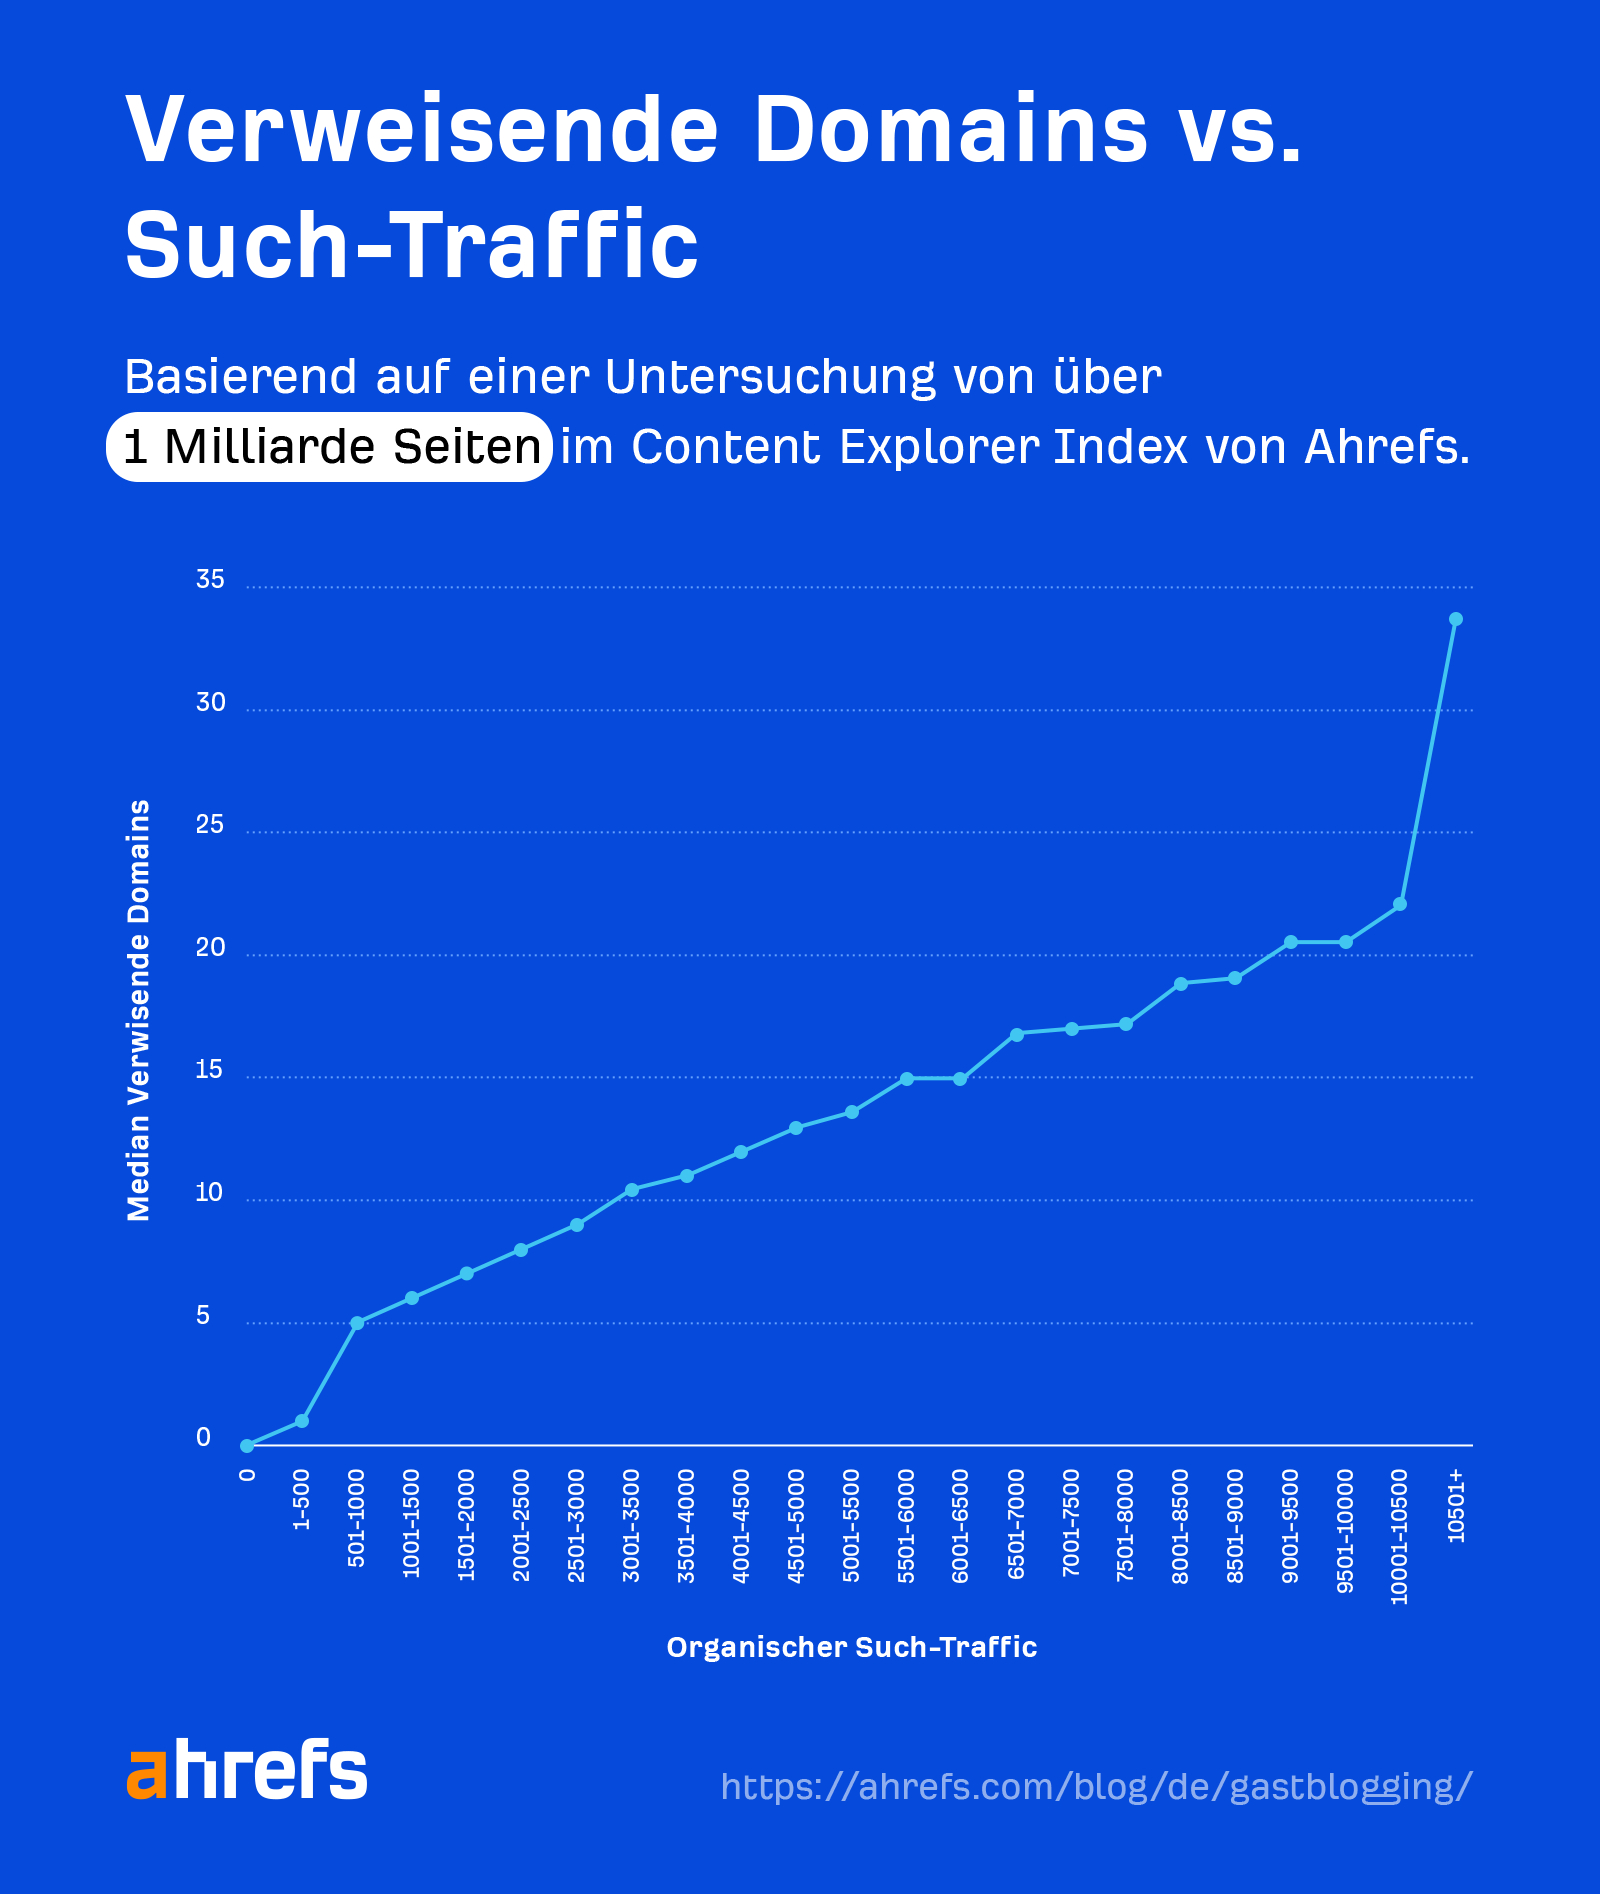 Chart showing the correlation between search traffic and referring domains
